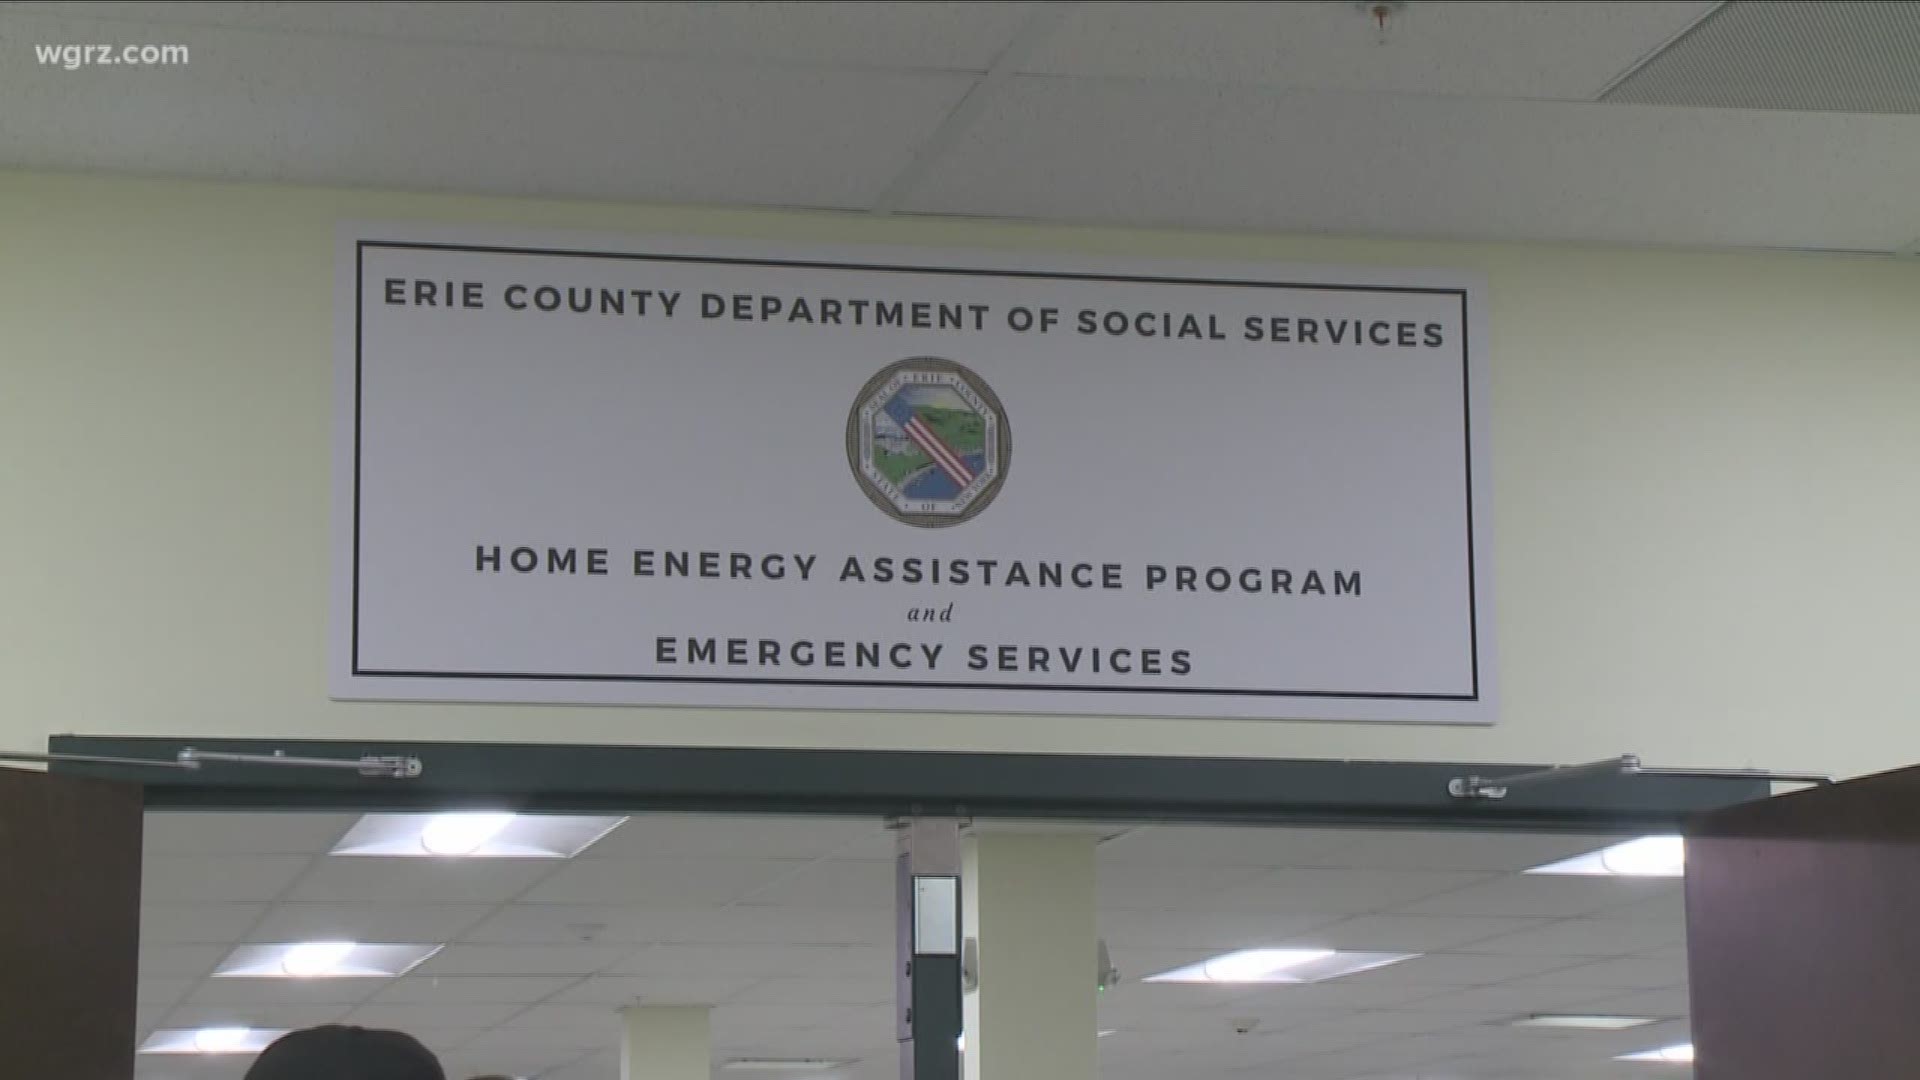 HEAP office open to accept applications for home heating assistance